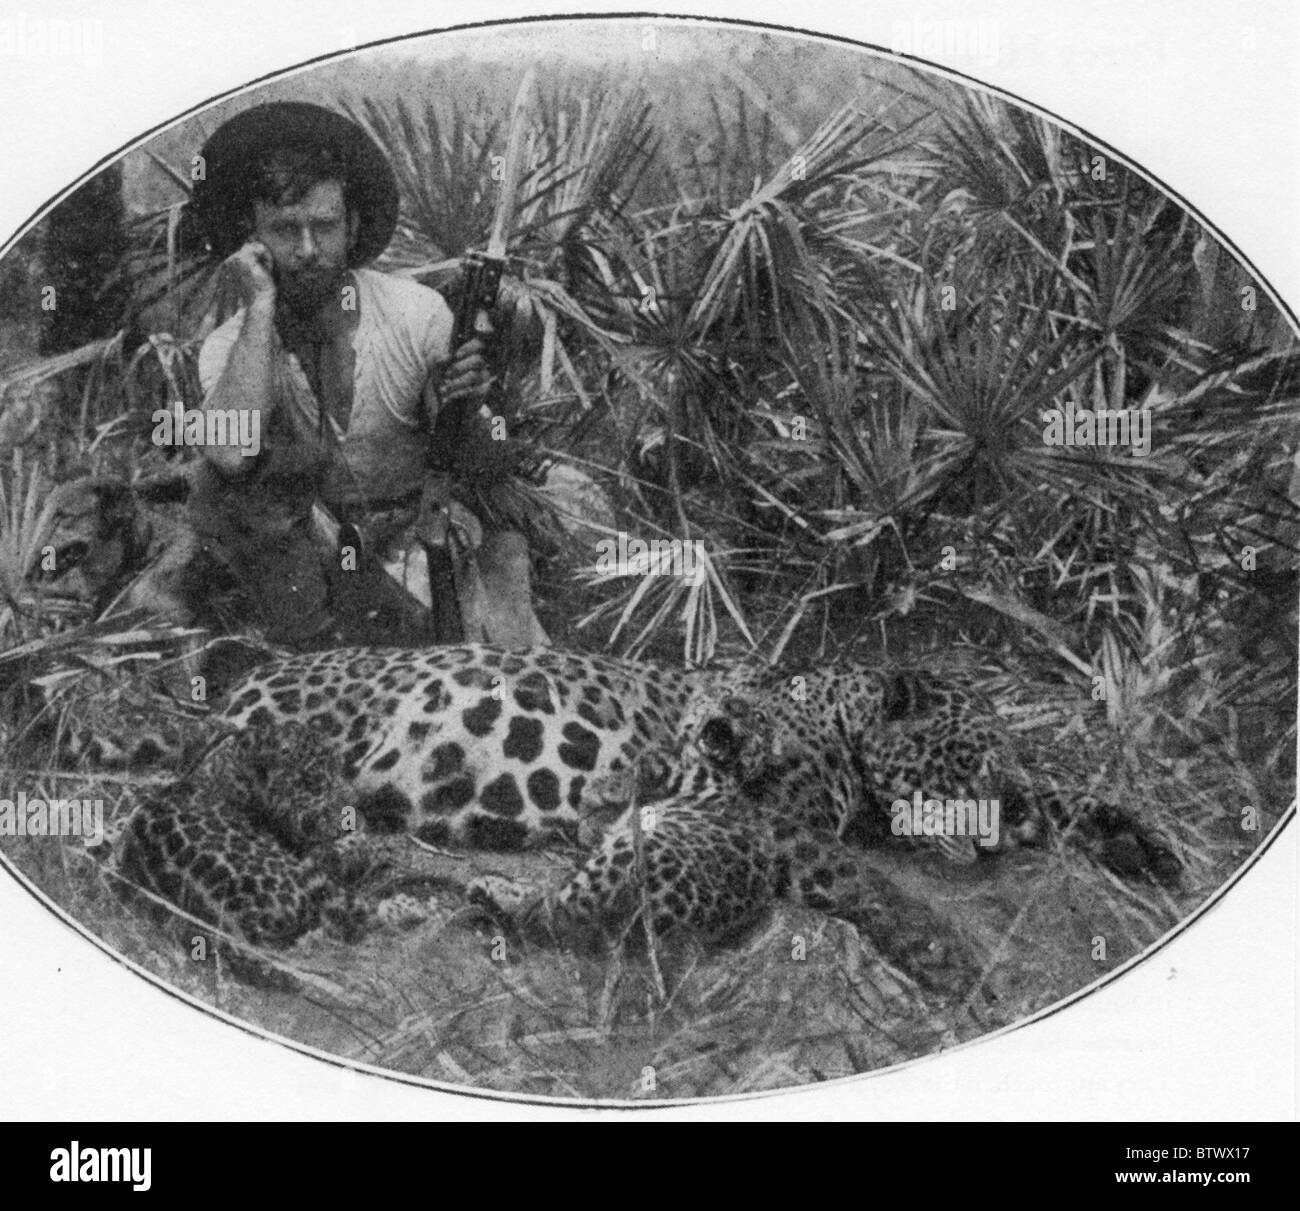 PERCY HARRISON FAWCETT (1867-1925 ?) The last photo of the British explorer who died in the Amazon rainforest in Brazil Stock Photo